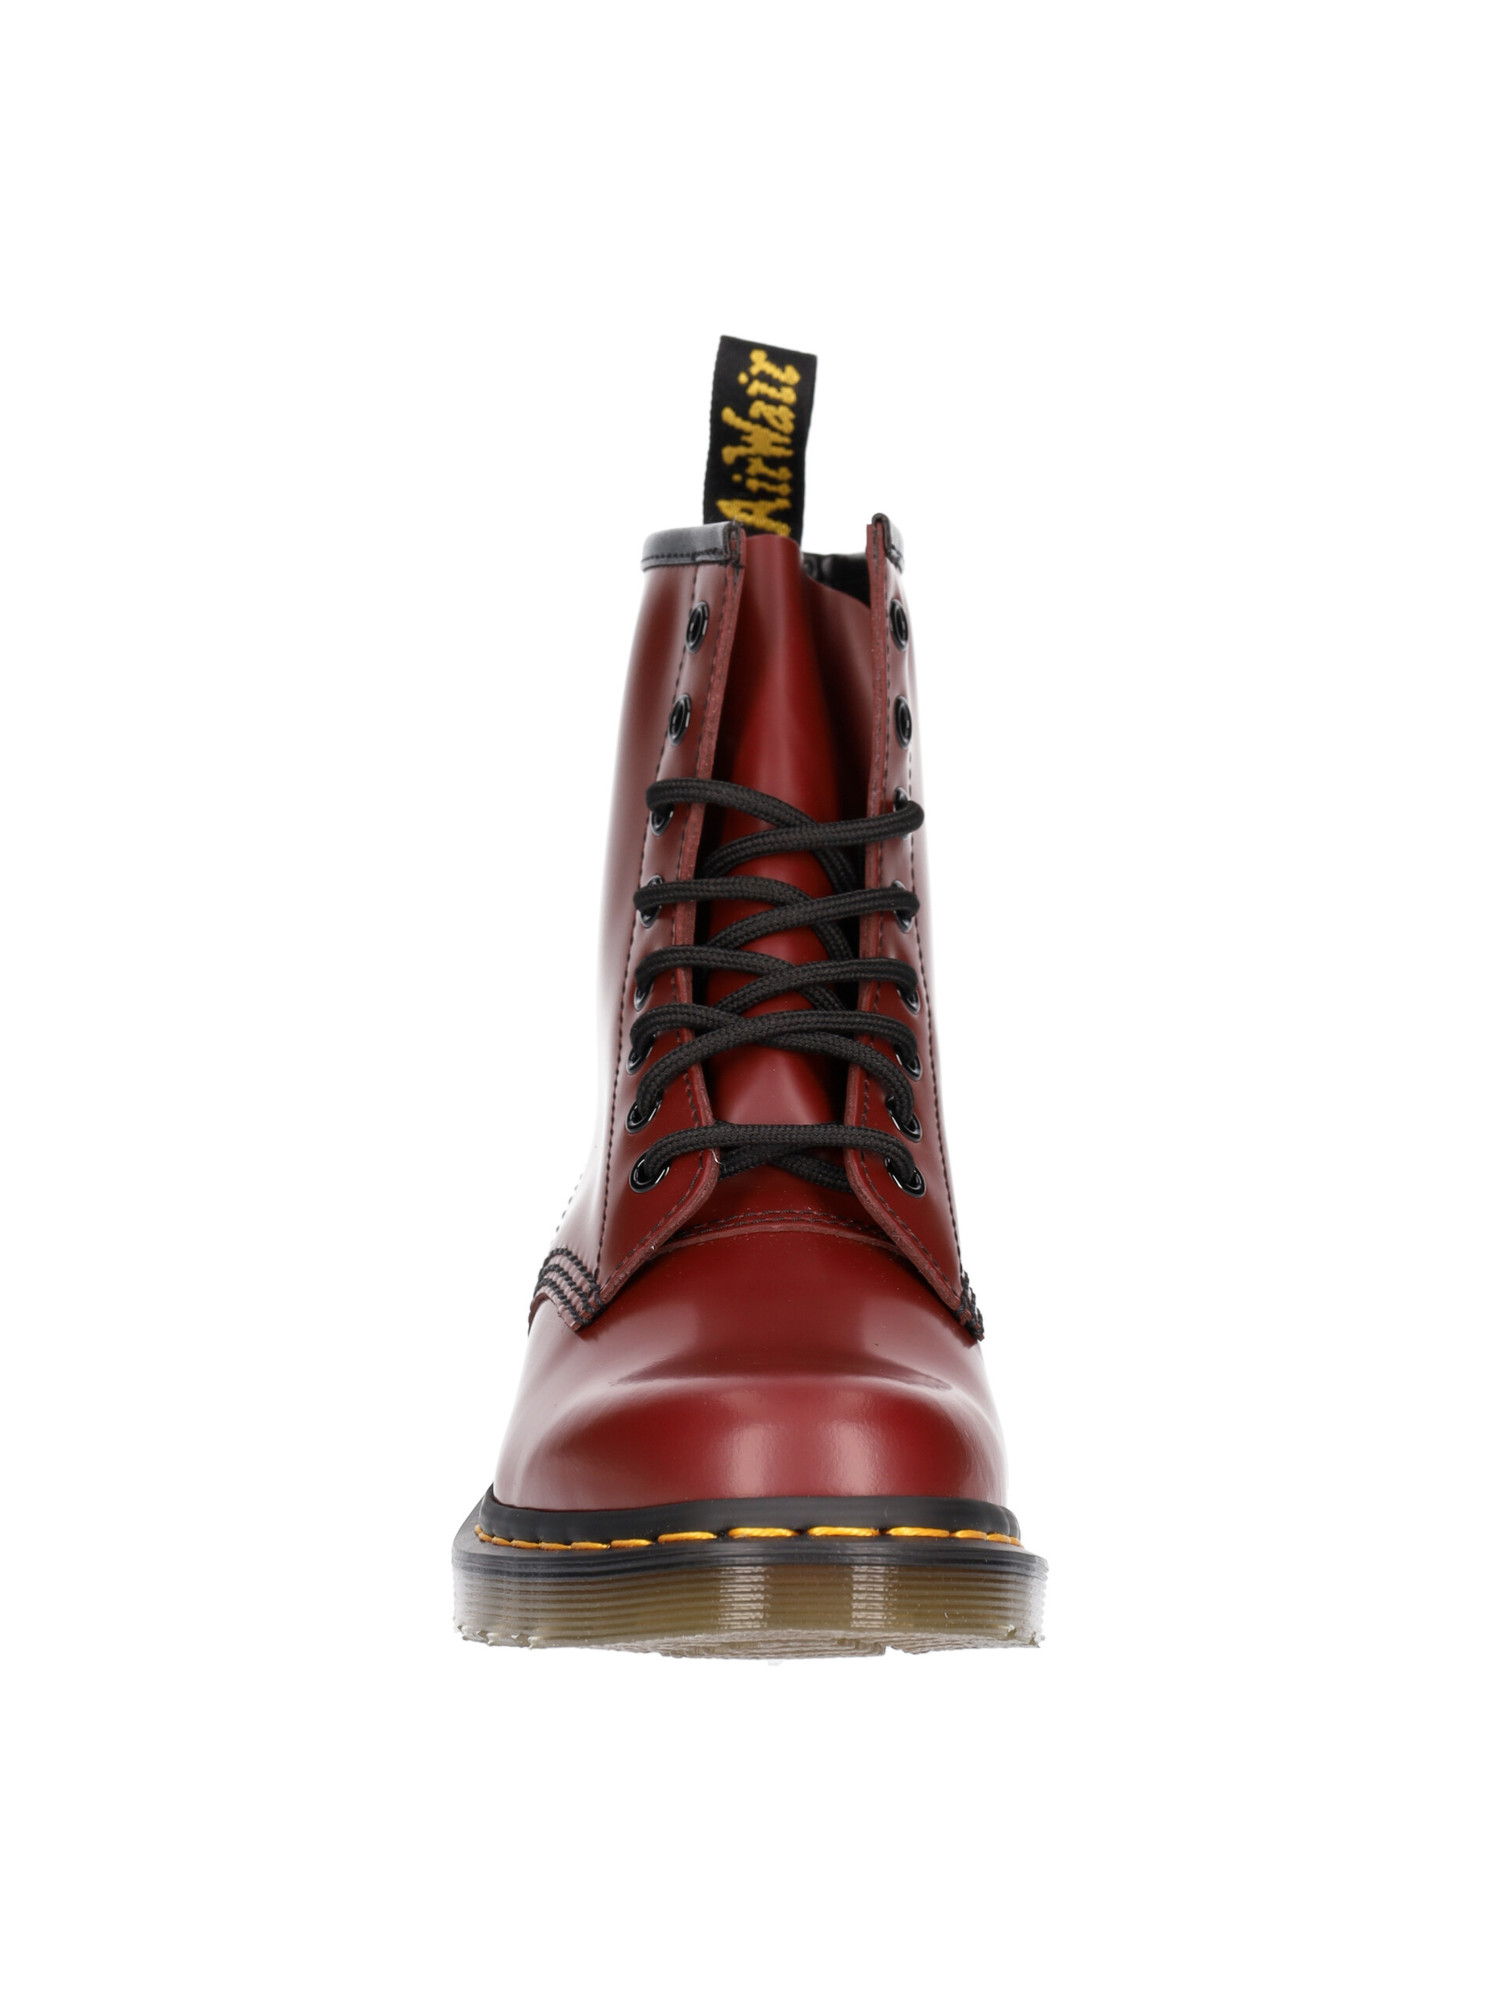 anfibio-dr-martens-1460-cherry-red-donna